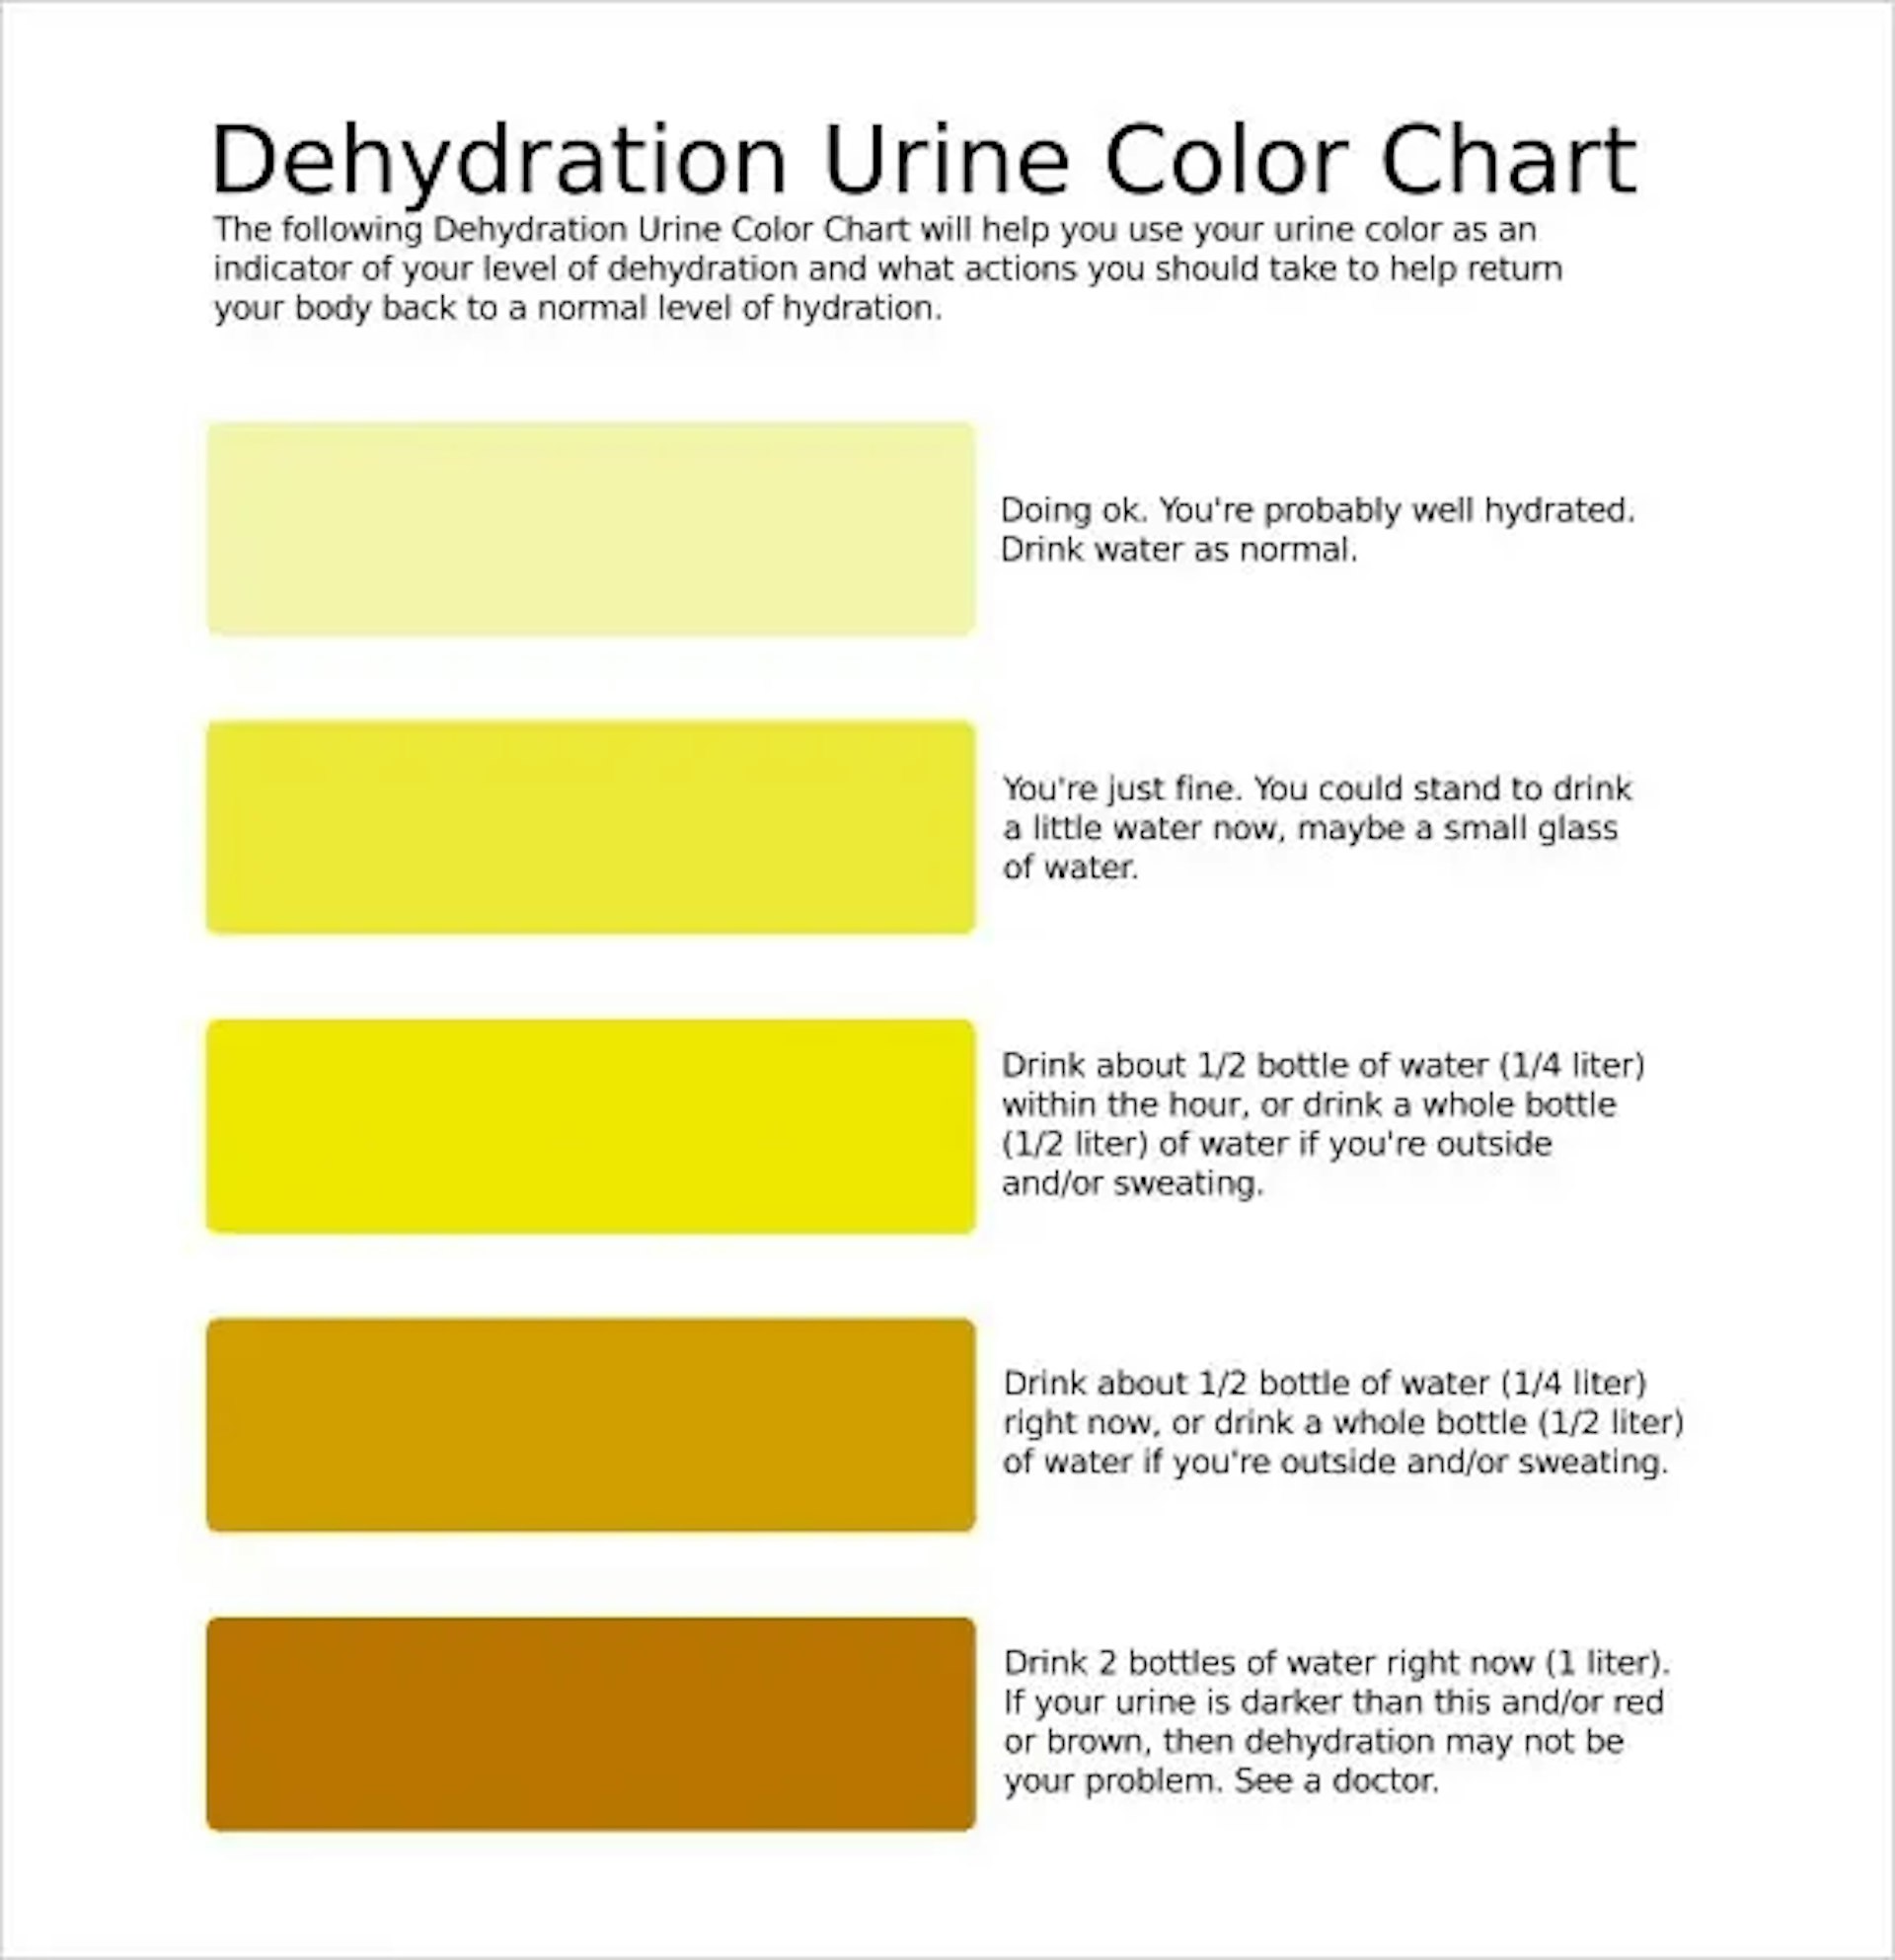 dehydration urine color chart